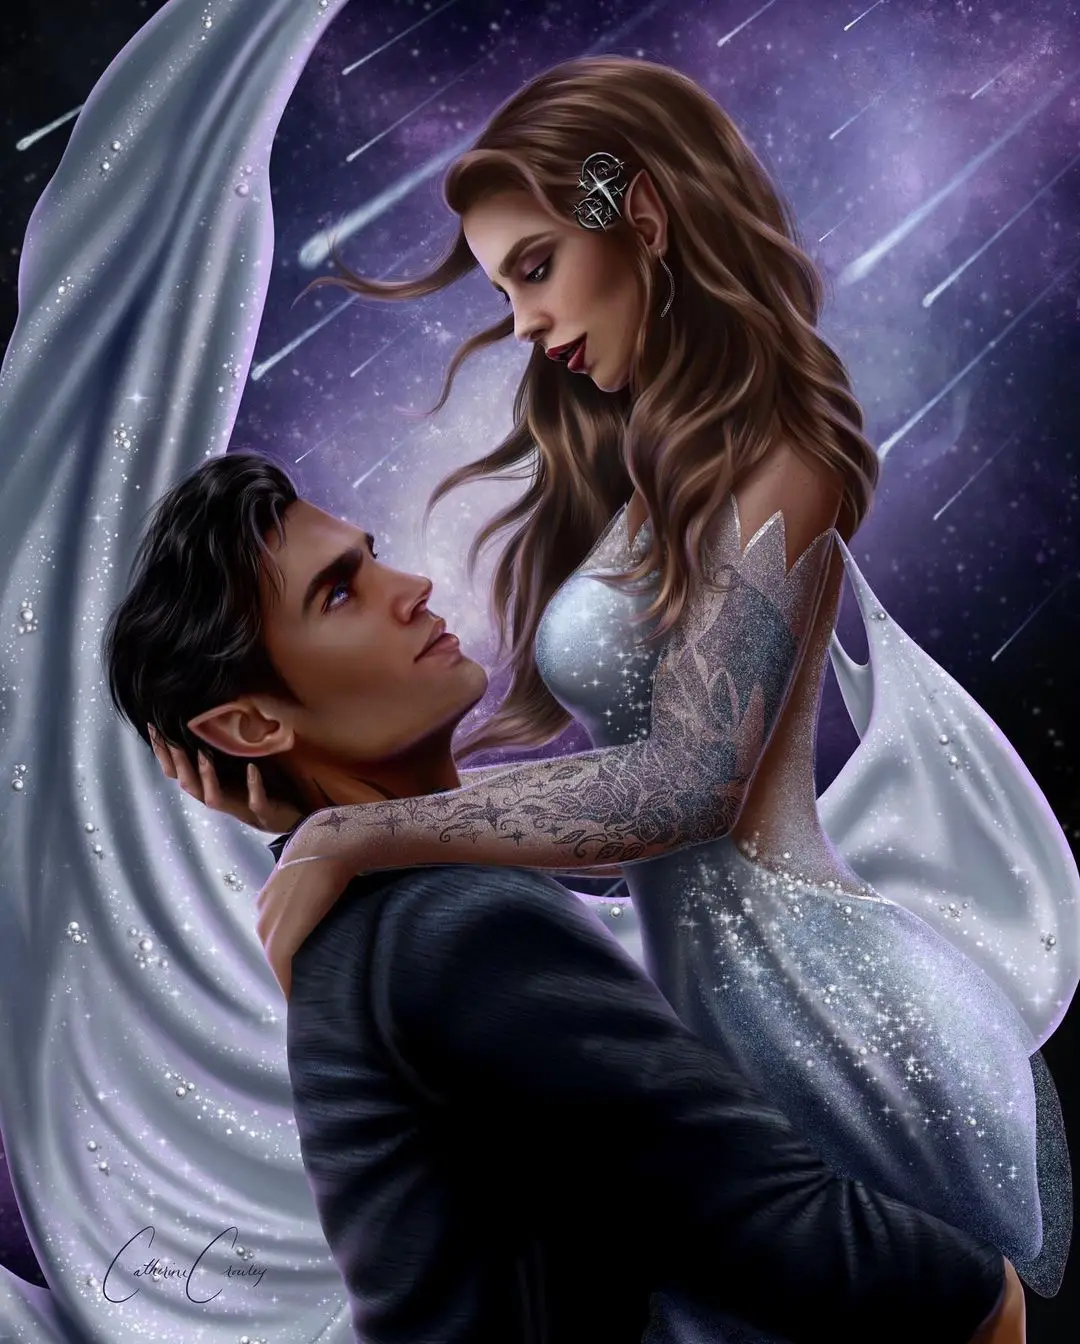 What's Your Favourite Scene in ACOTAR? 🥰, Gallery posted by ACOTAR